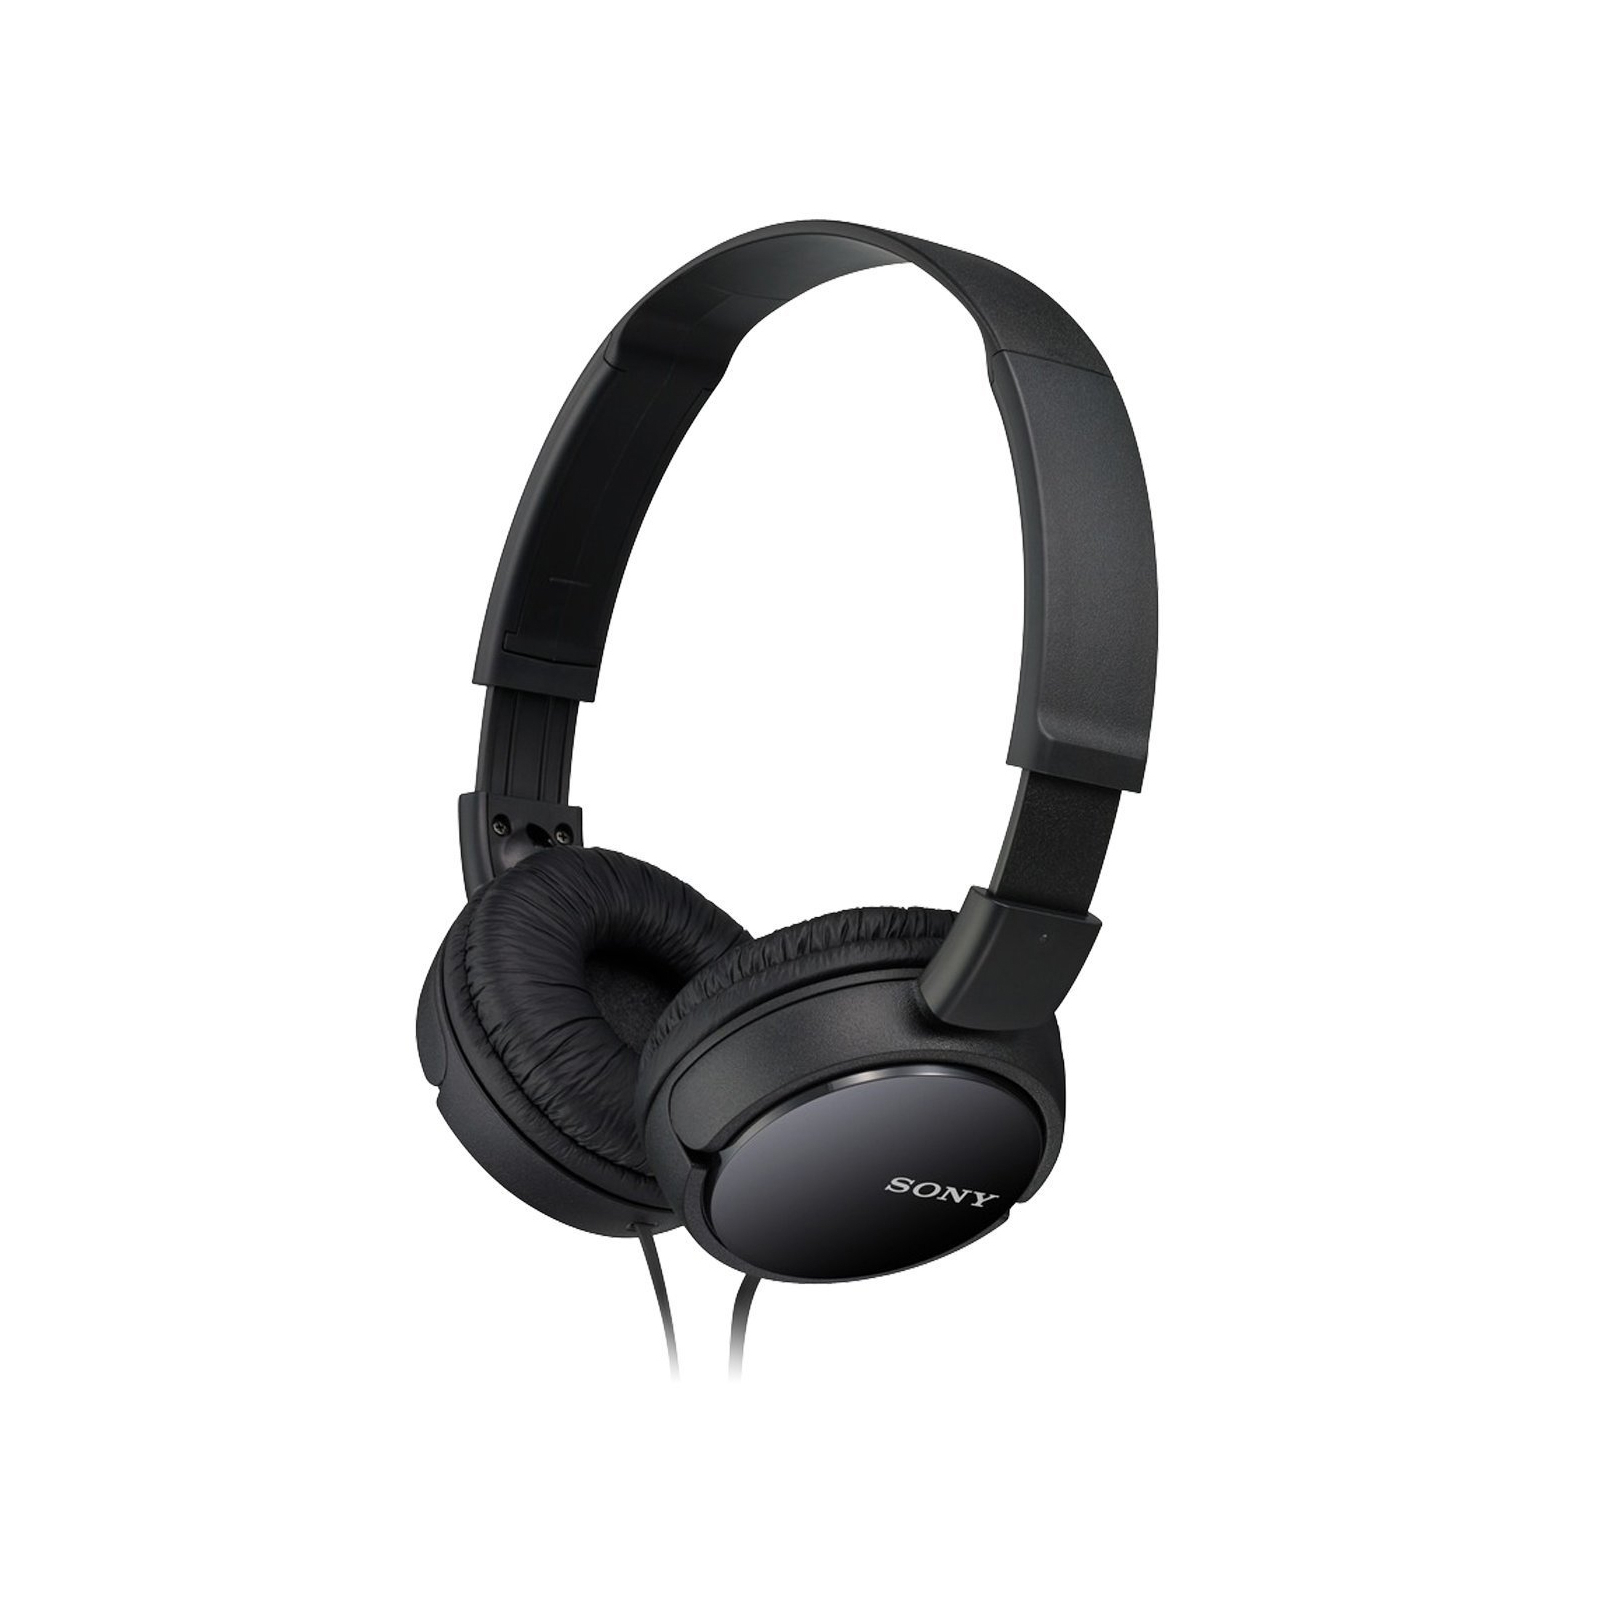 Навушники Sony MDR-ZX110 White (MDRZX110W.AE)